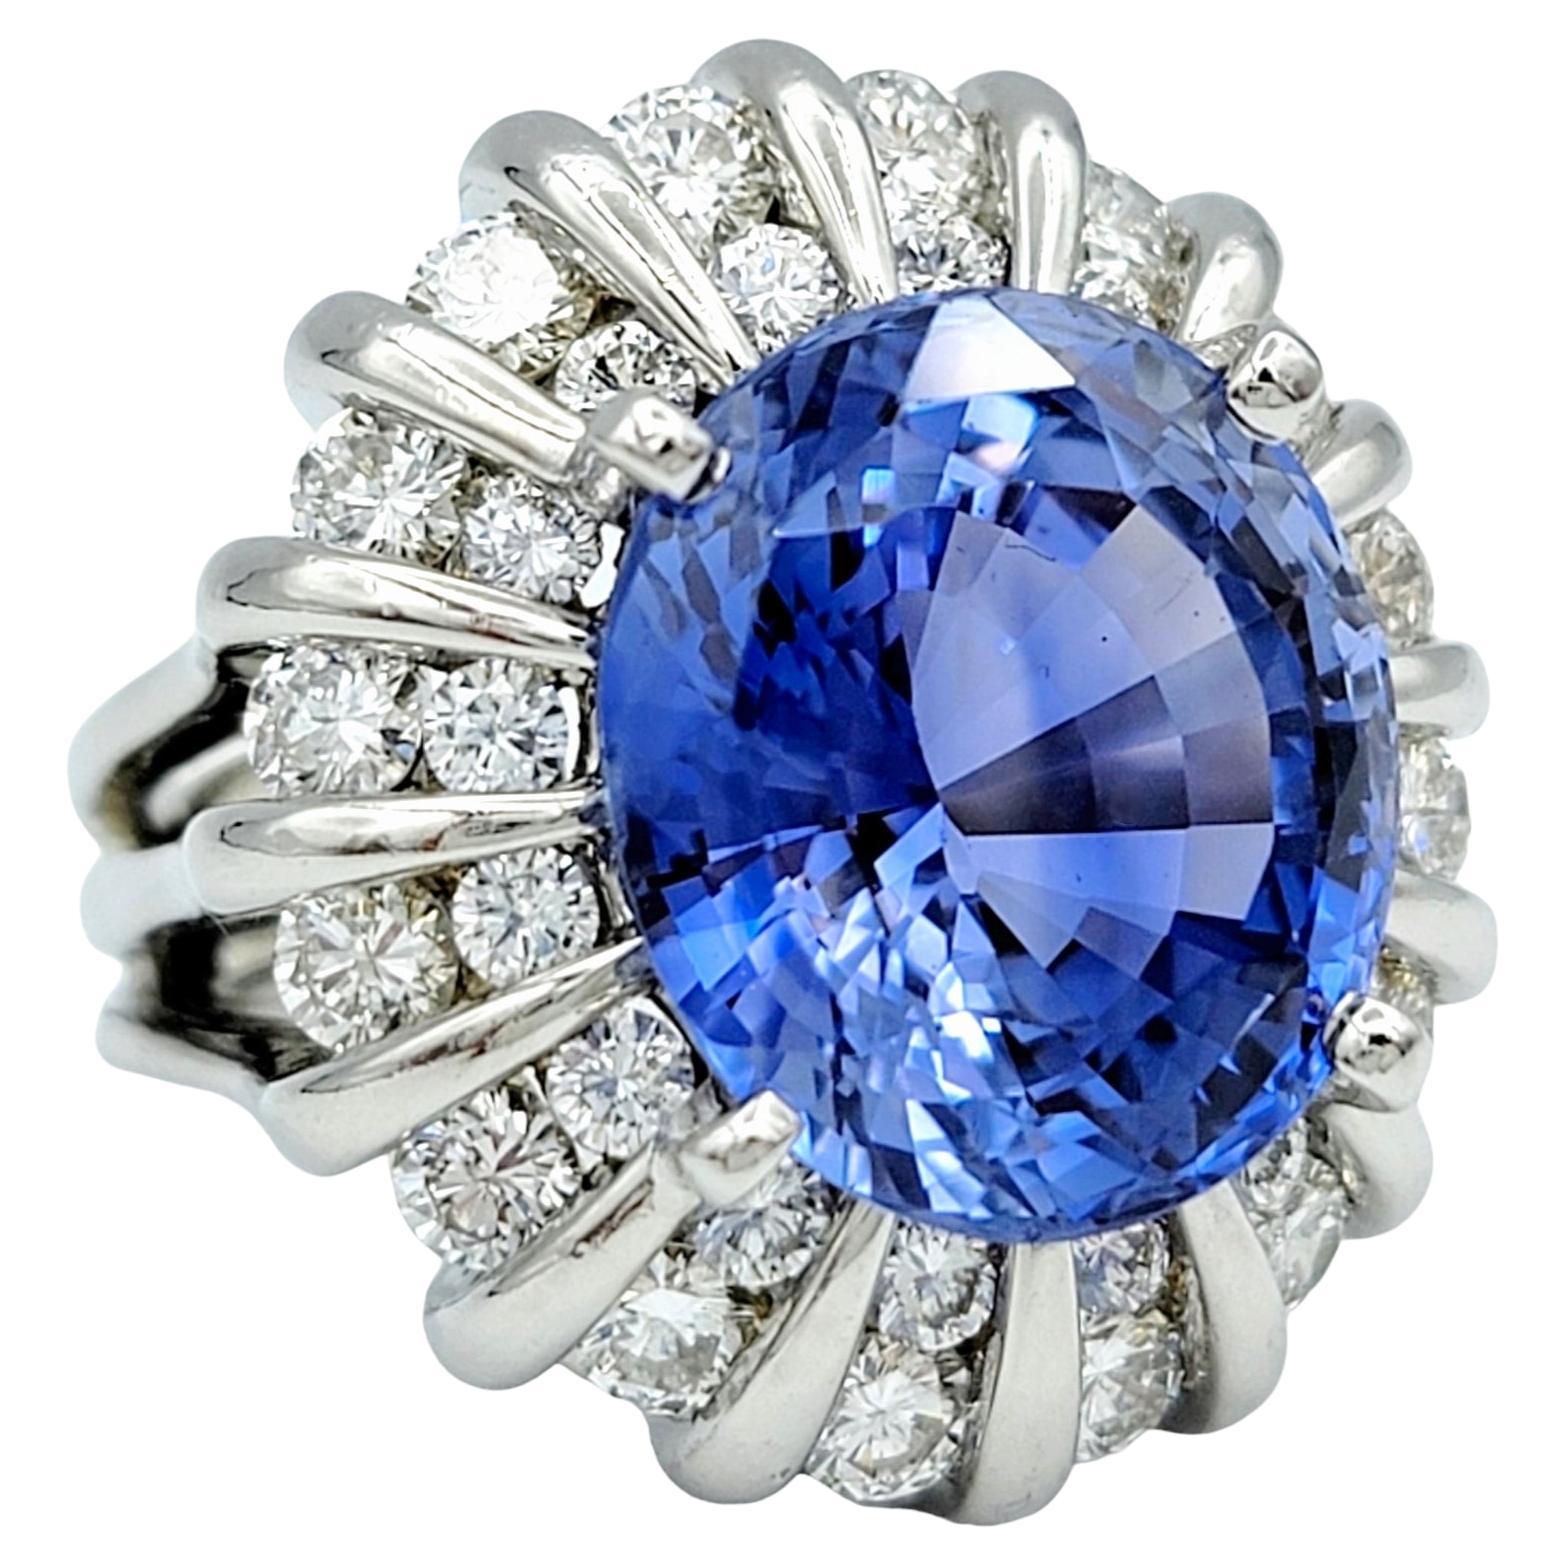 Rare Untreated 16.27 Carat Oval Cut Ceylon Sapphire and Double Diamond Halo Ring For Sale